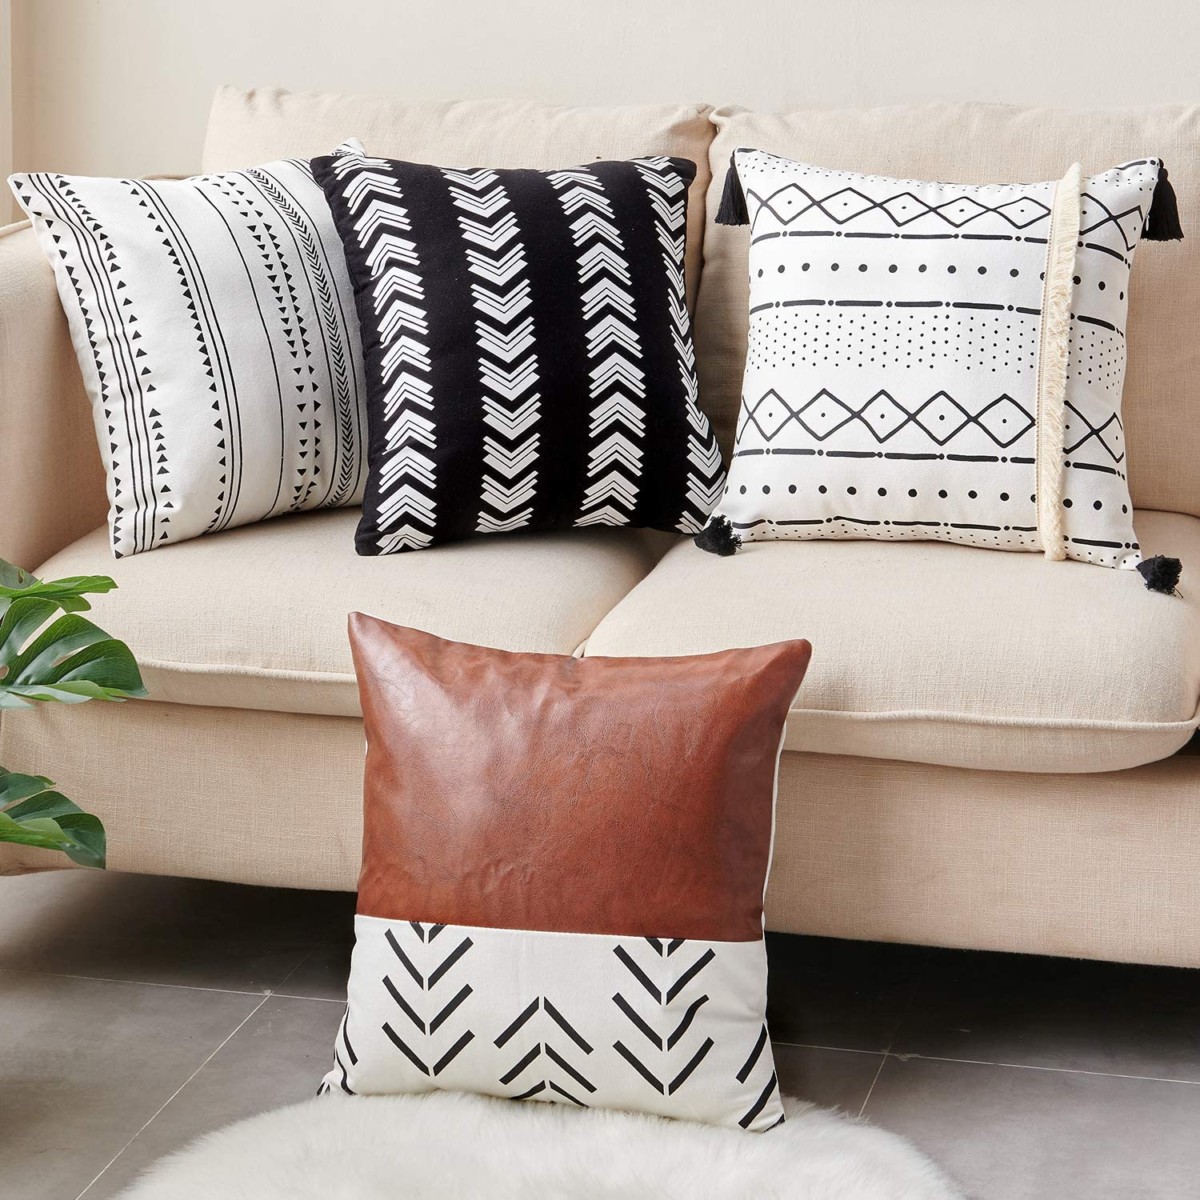 How to Decorate with Pillows - Style 1519